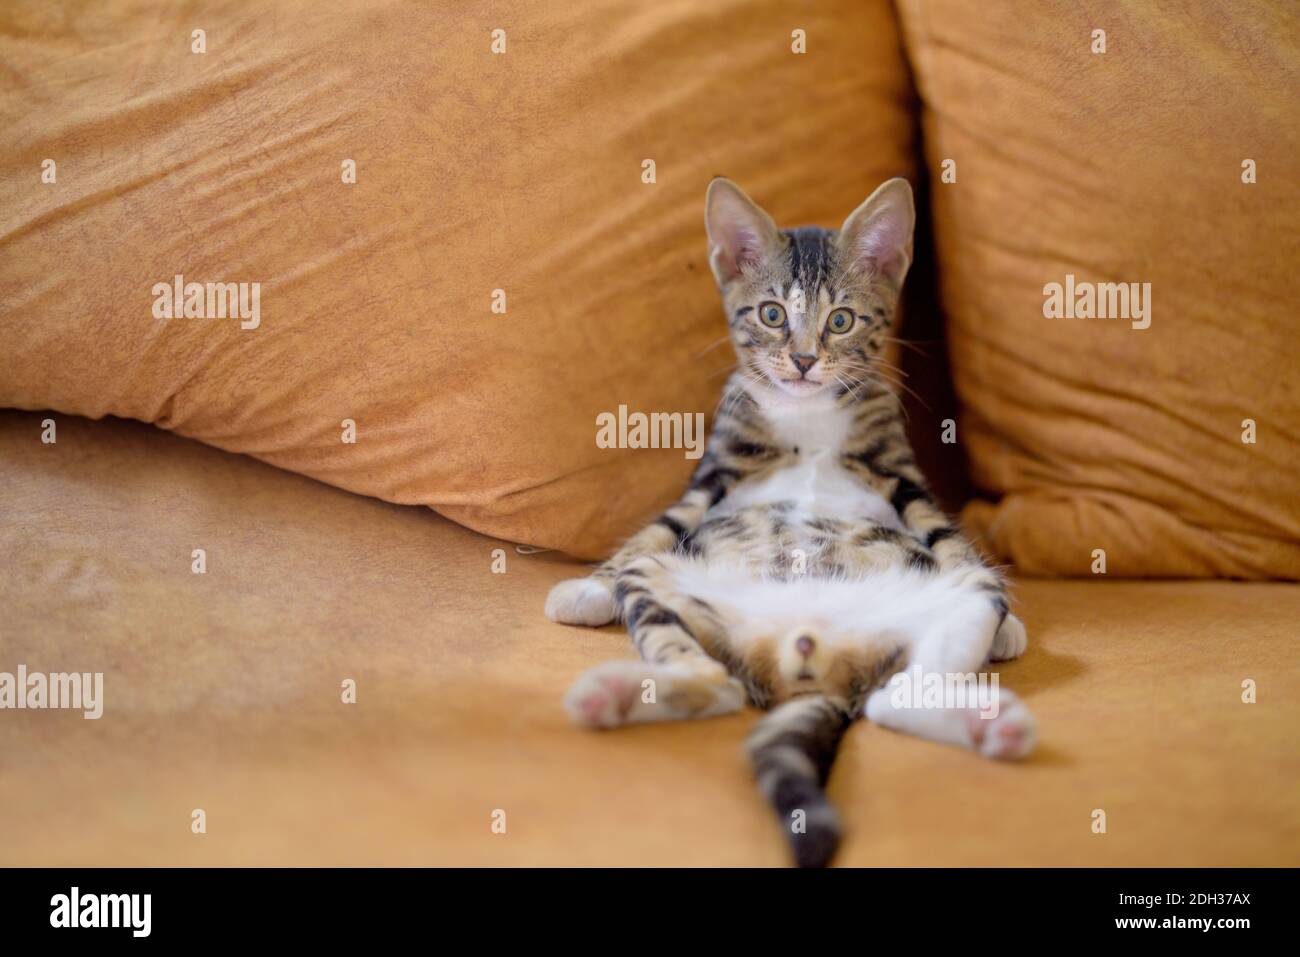 A closeup shot of an adorable little domestic cat sitting on a couch like human Stock Photo